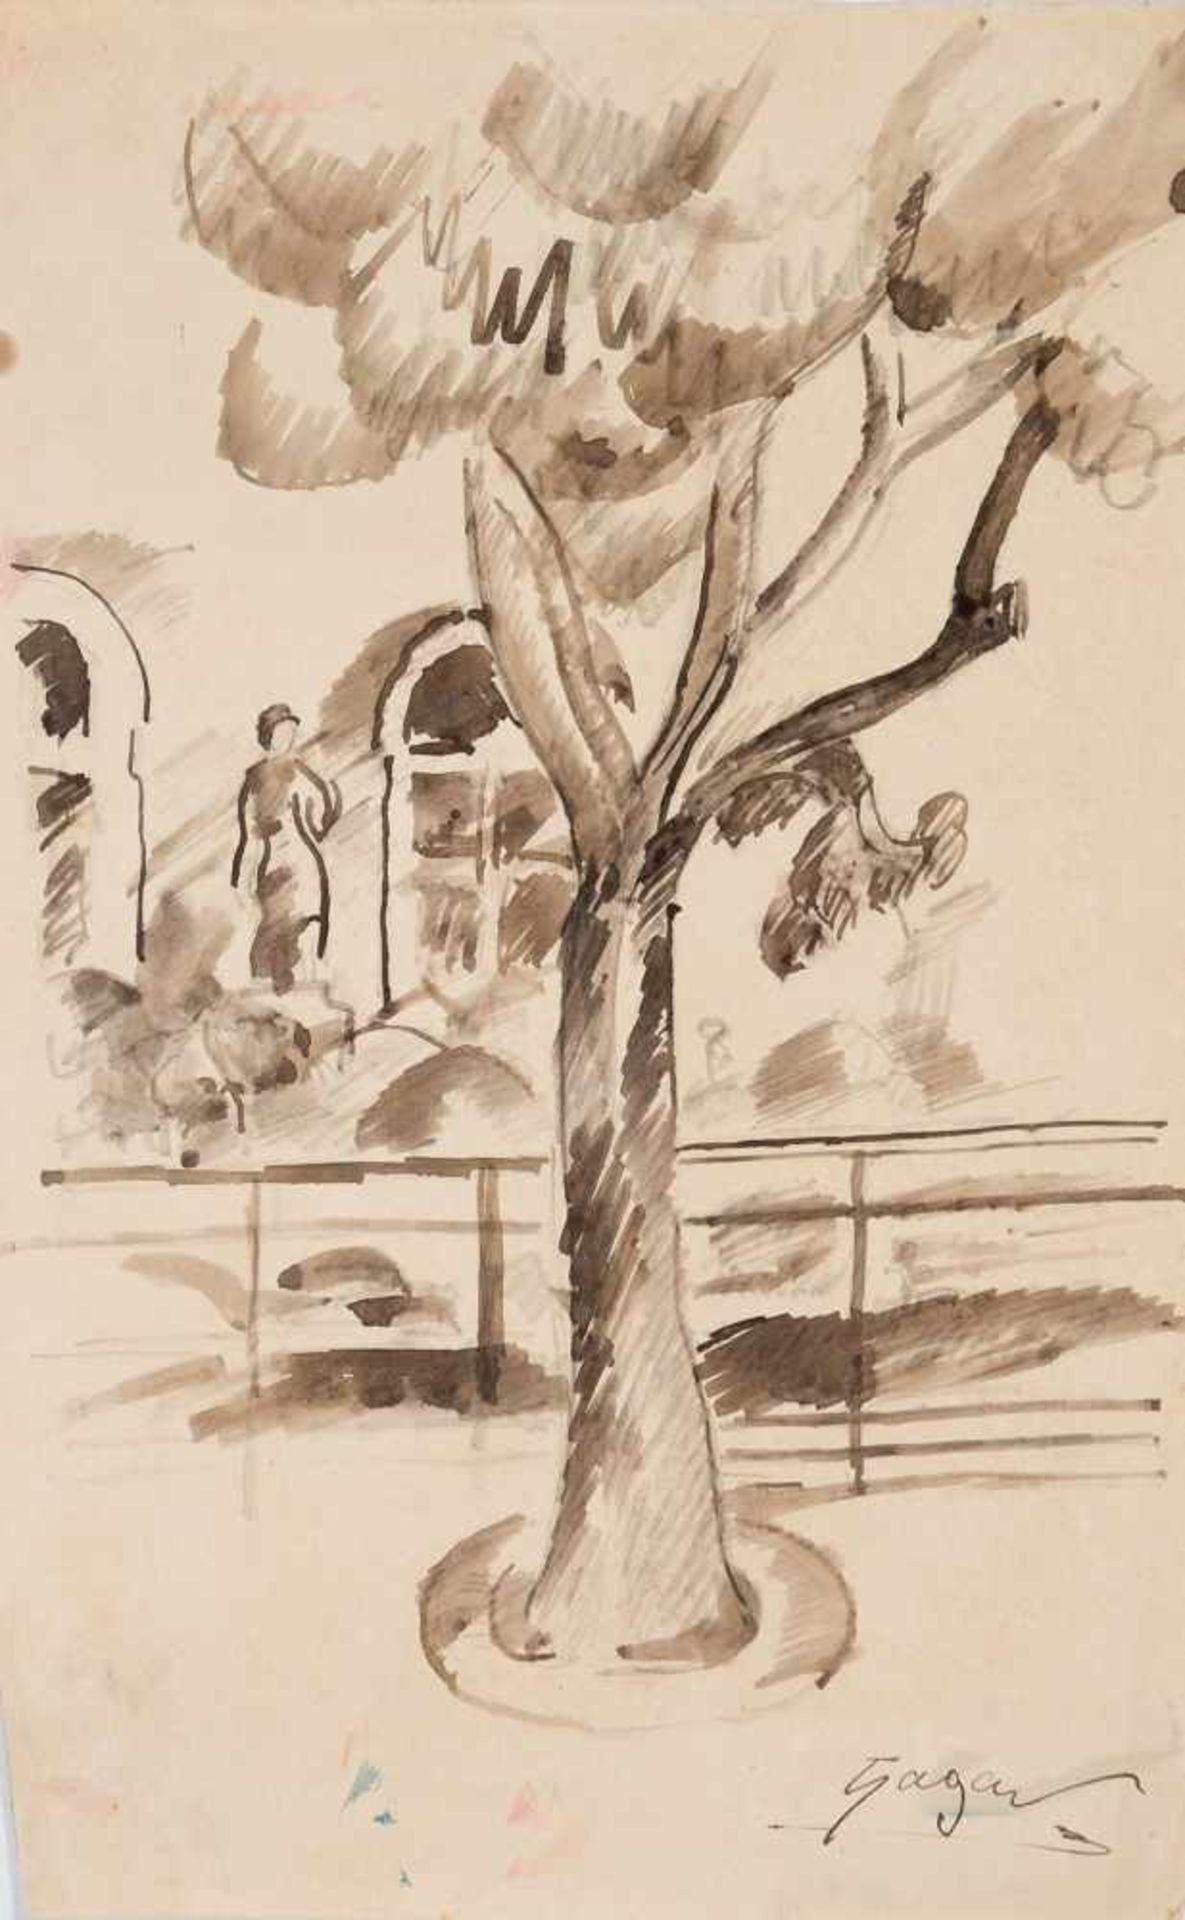 Celso Lagar (Ciudad Rodrigo, 1891 - Seville, 1966) Pencil and watercolour drawing on paper.